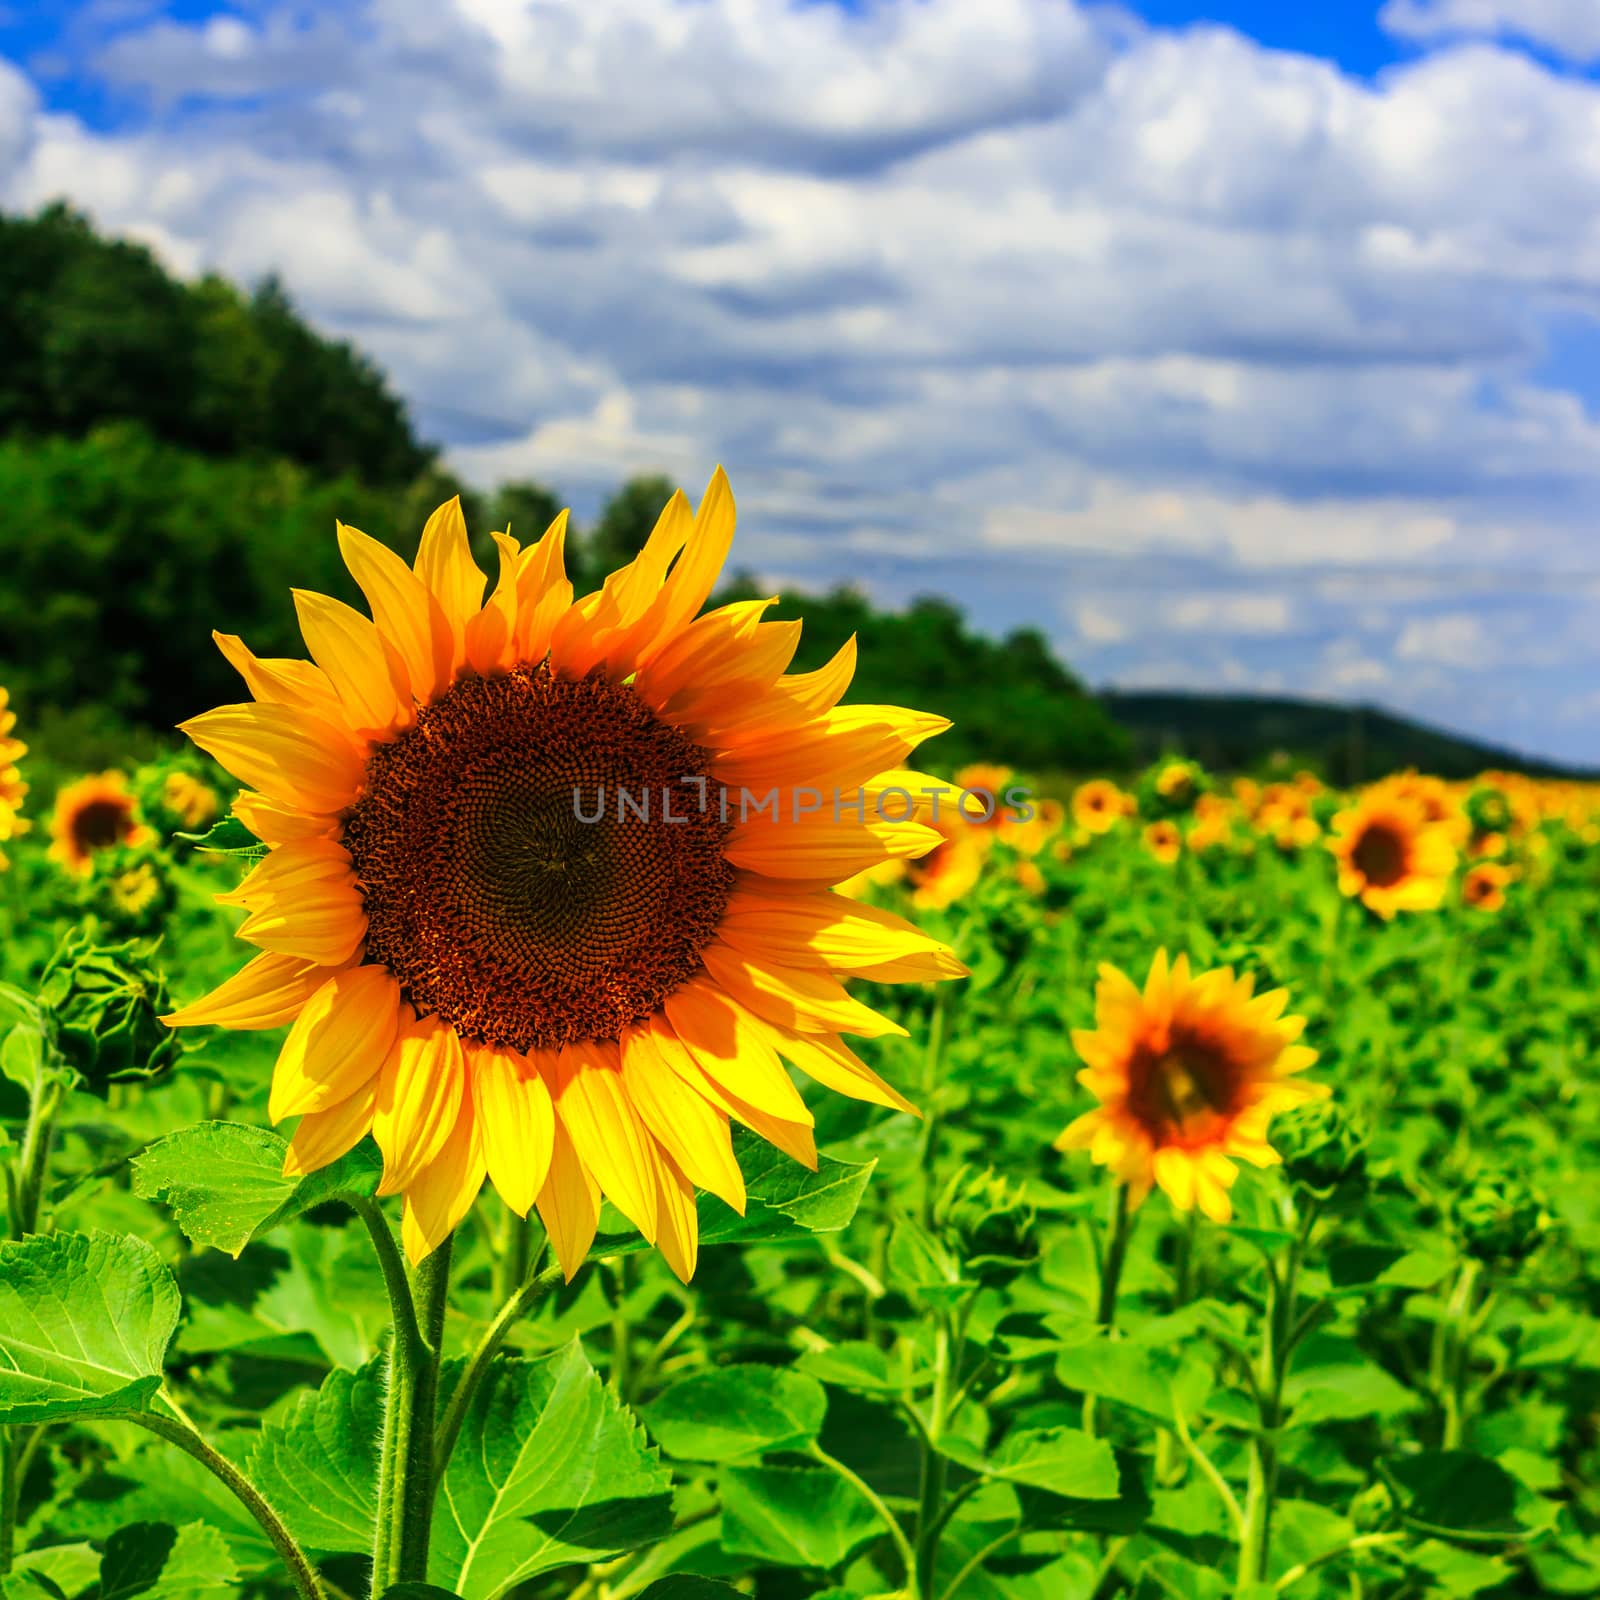 rows of young sunflowers near the hill under a blue sky square